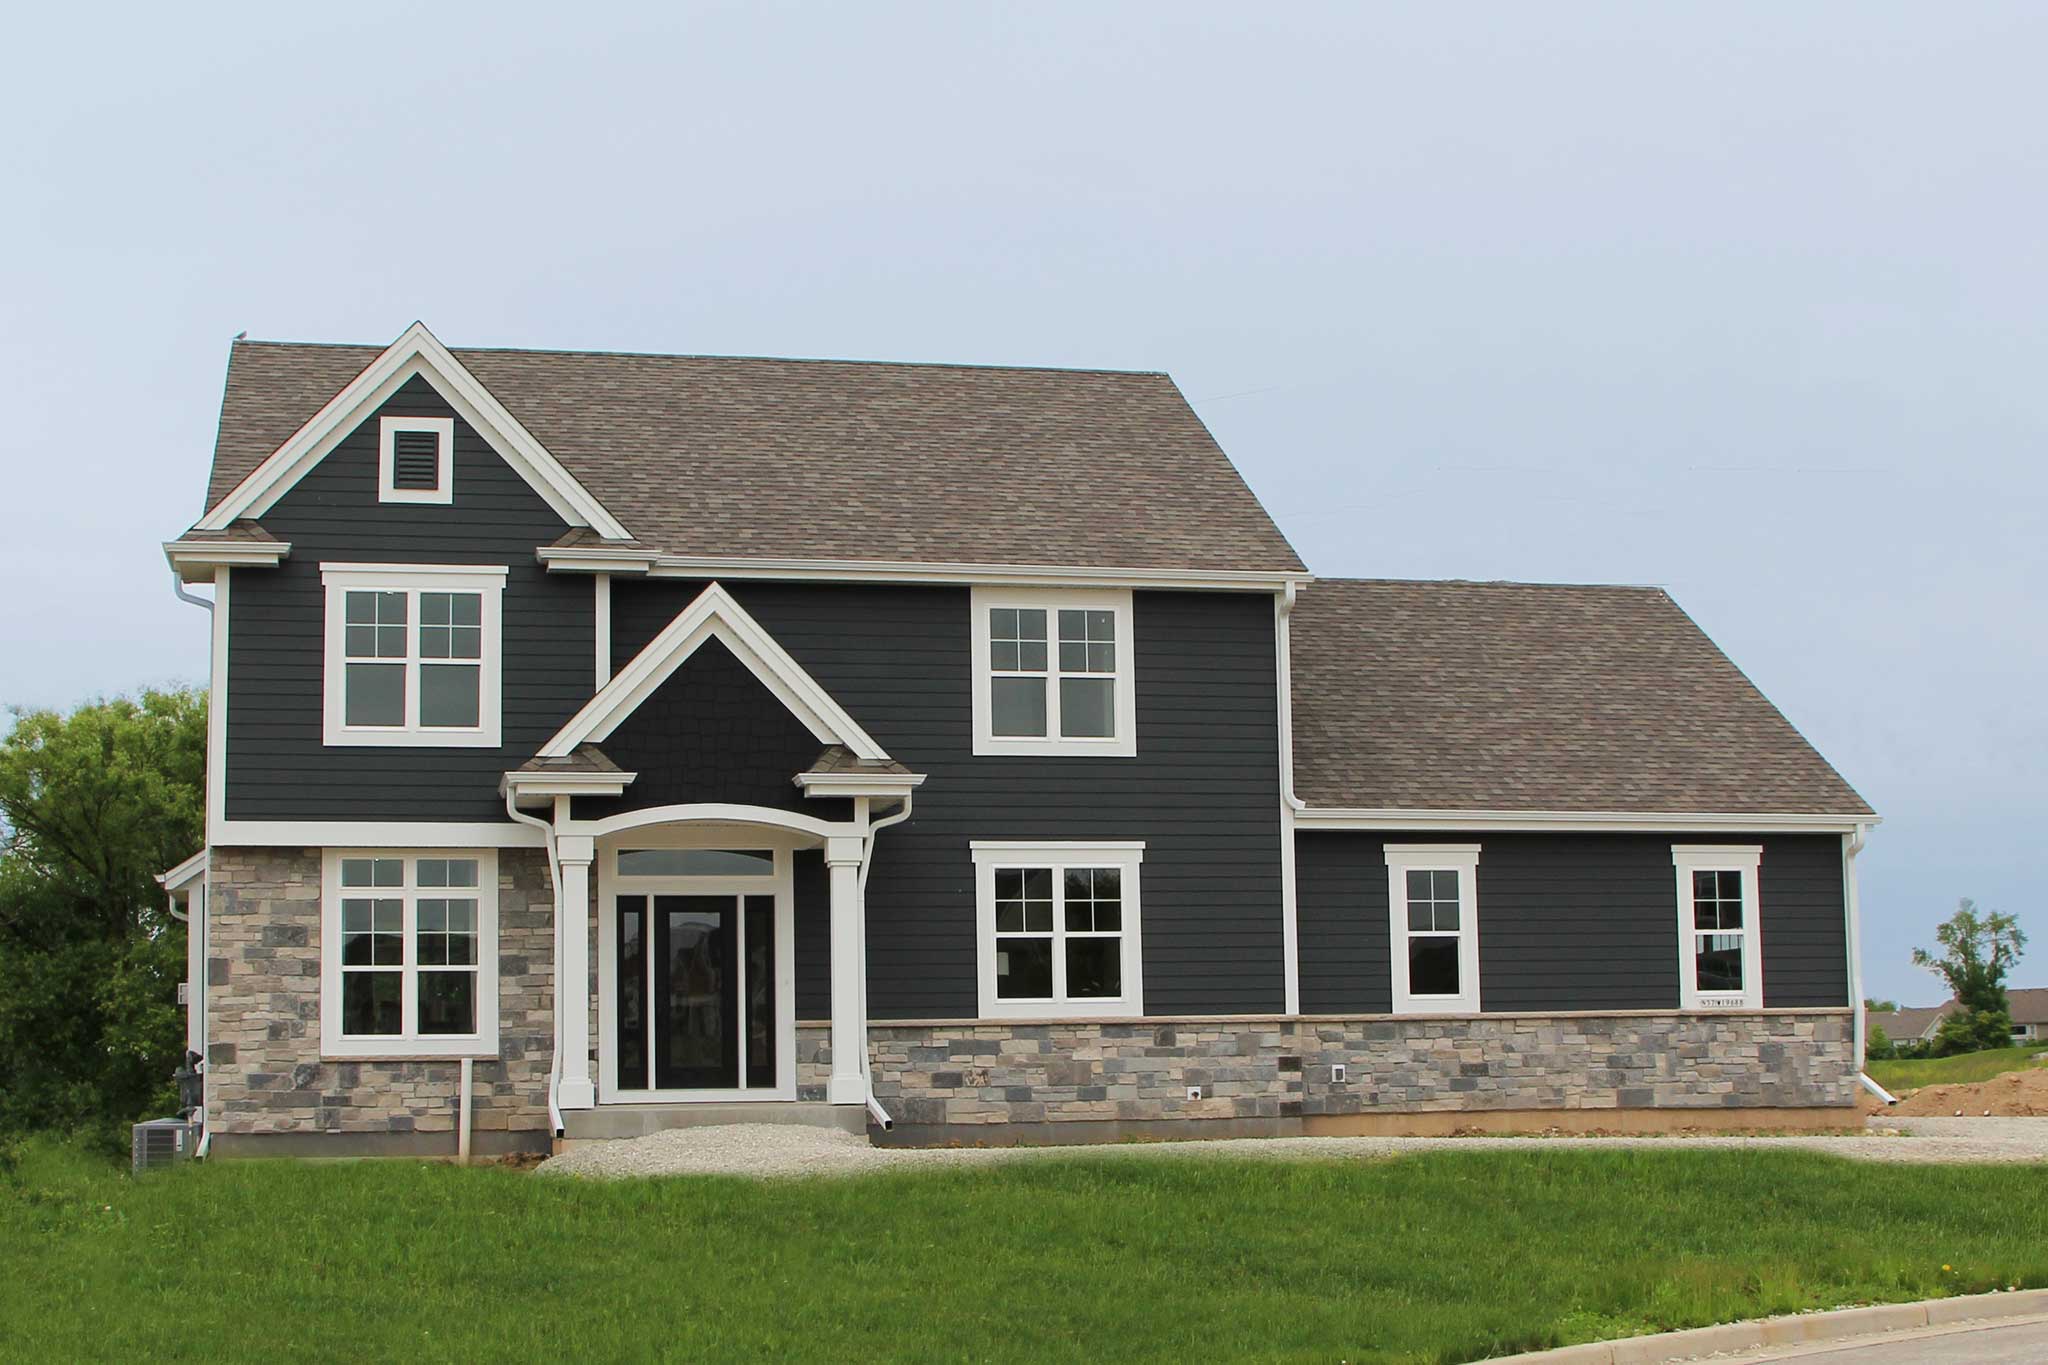 The Emerson model home exterior view